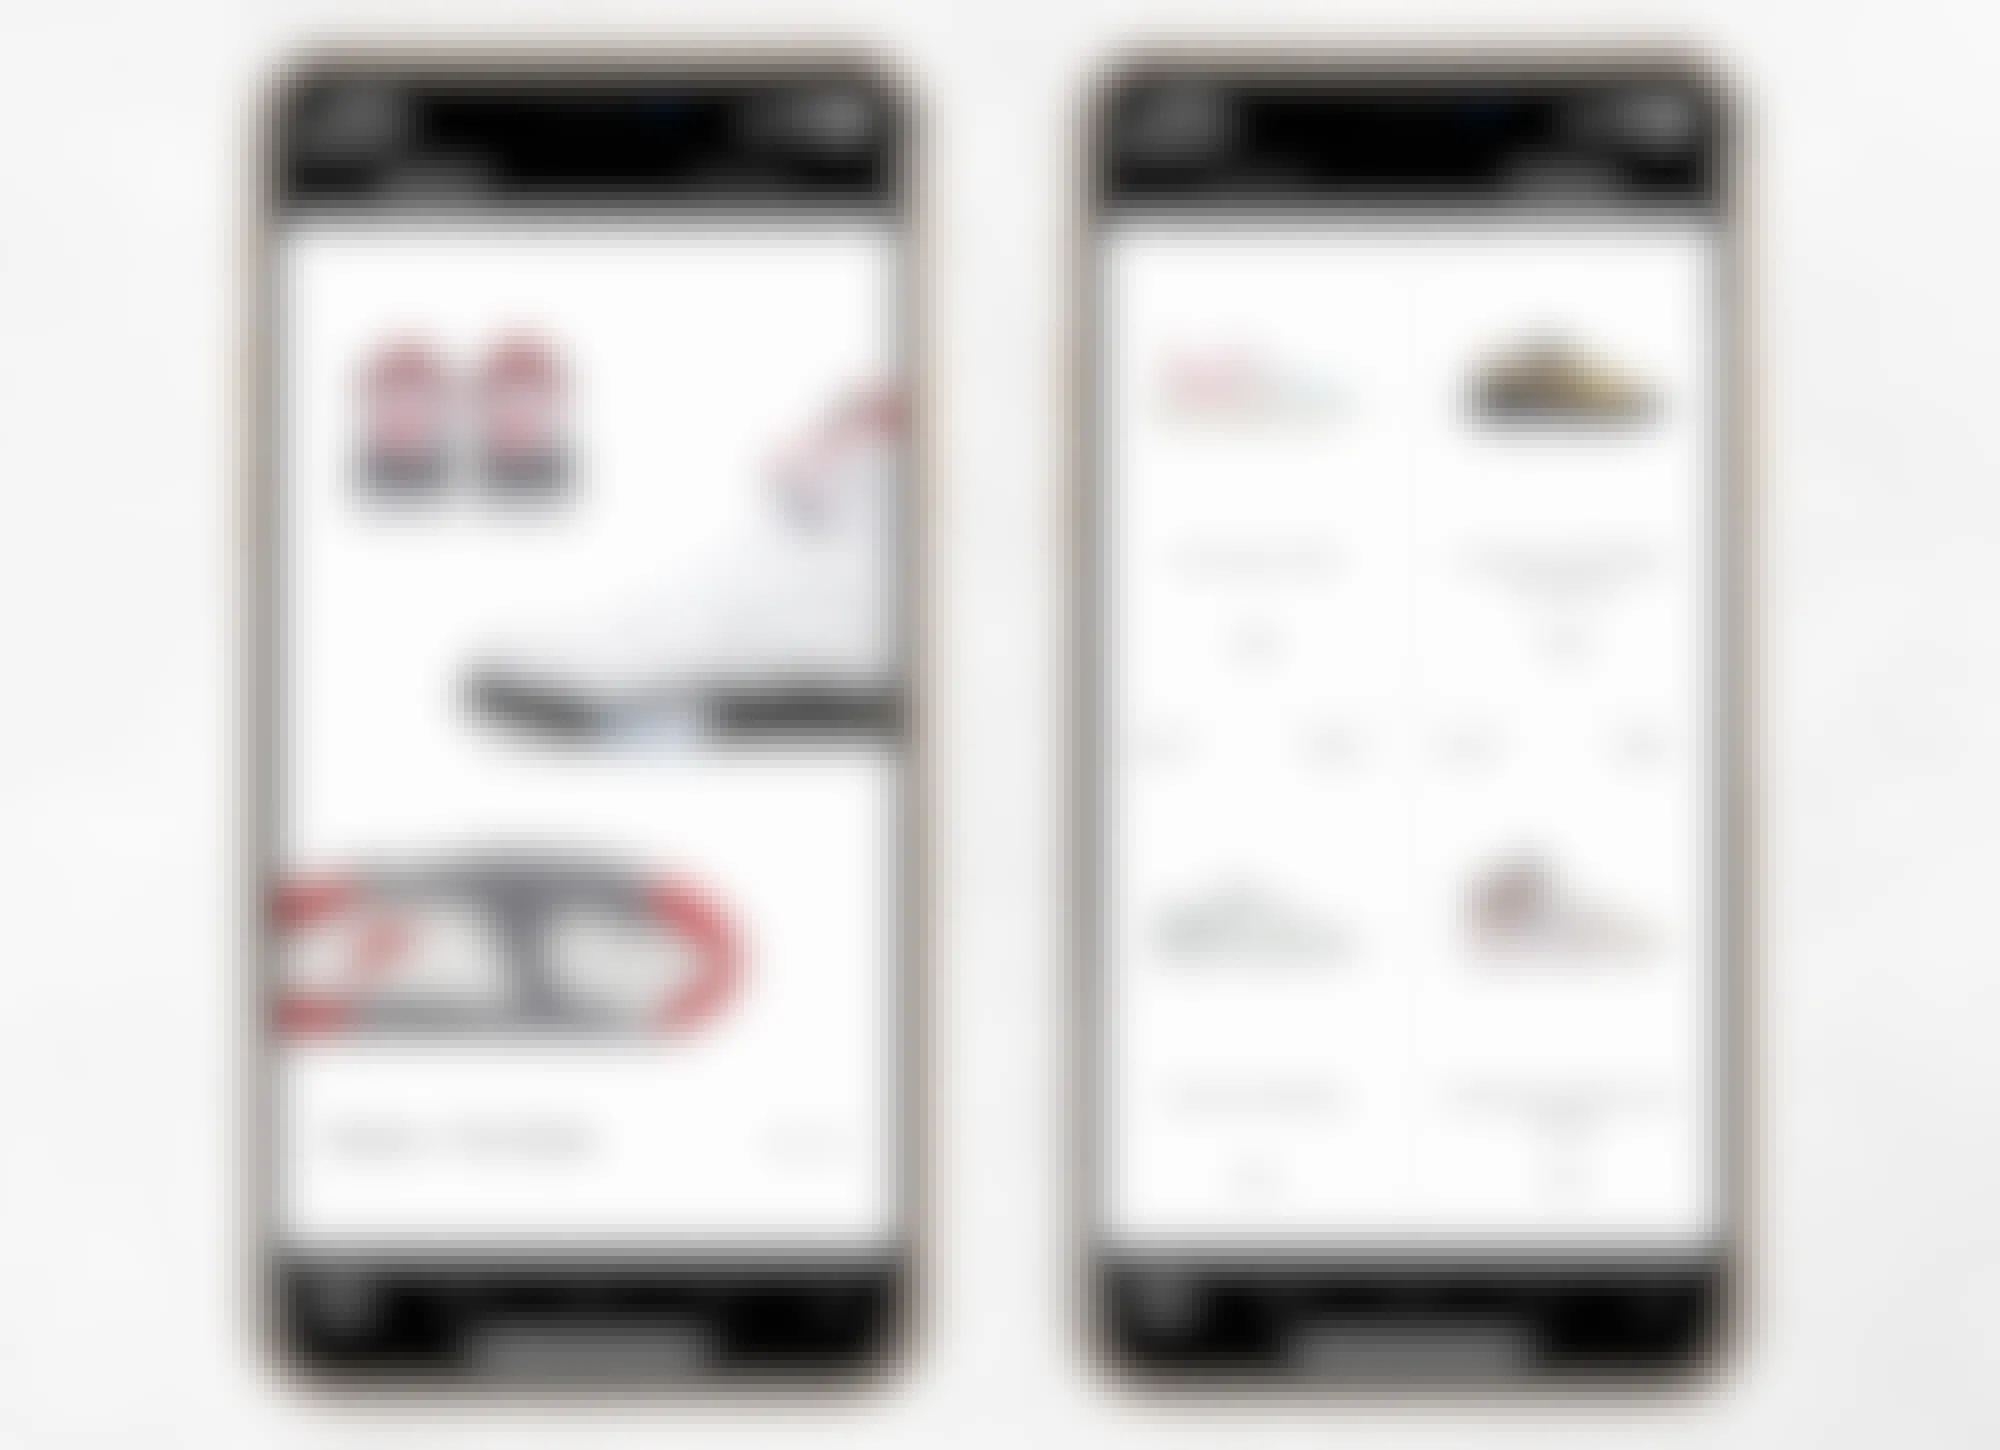 goat mobile app screenshots of discover page and calendar drops for new sneakers